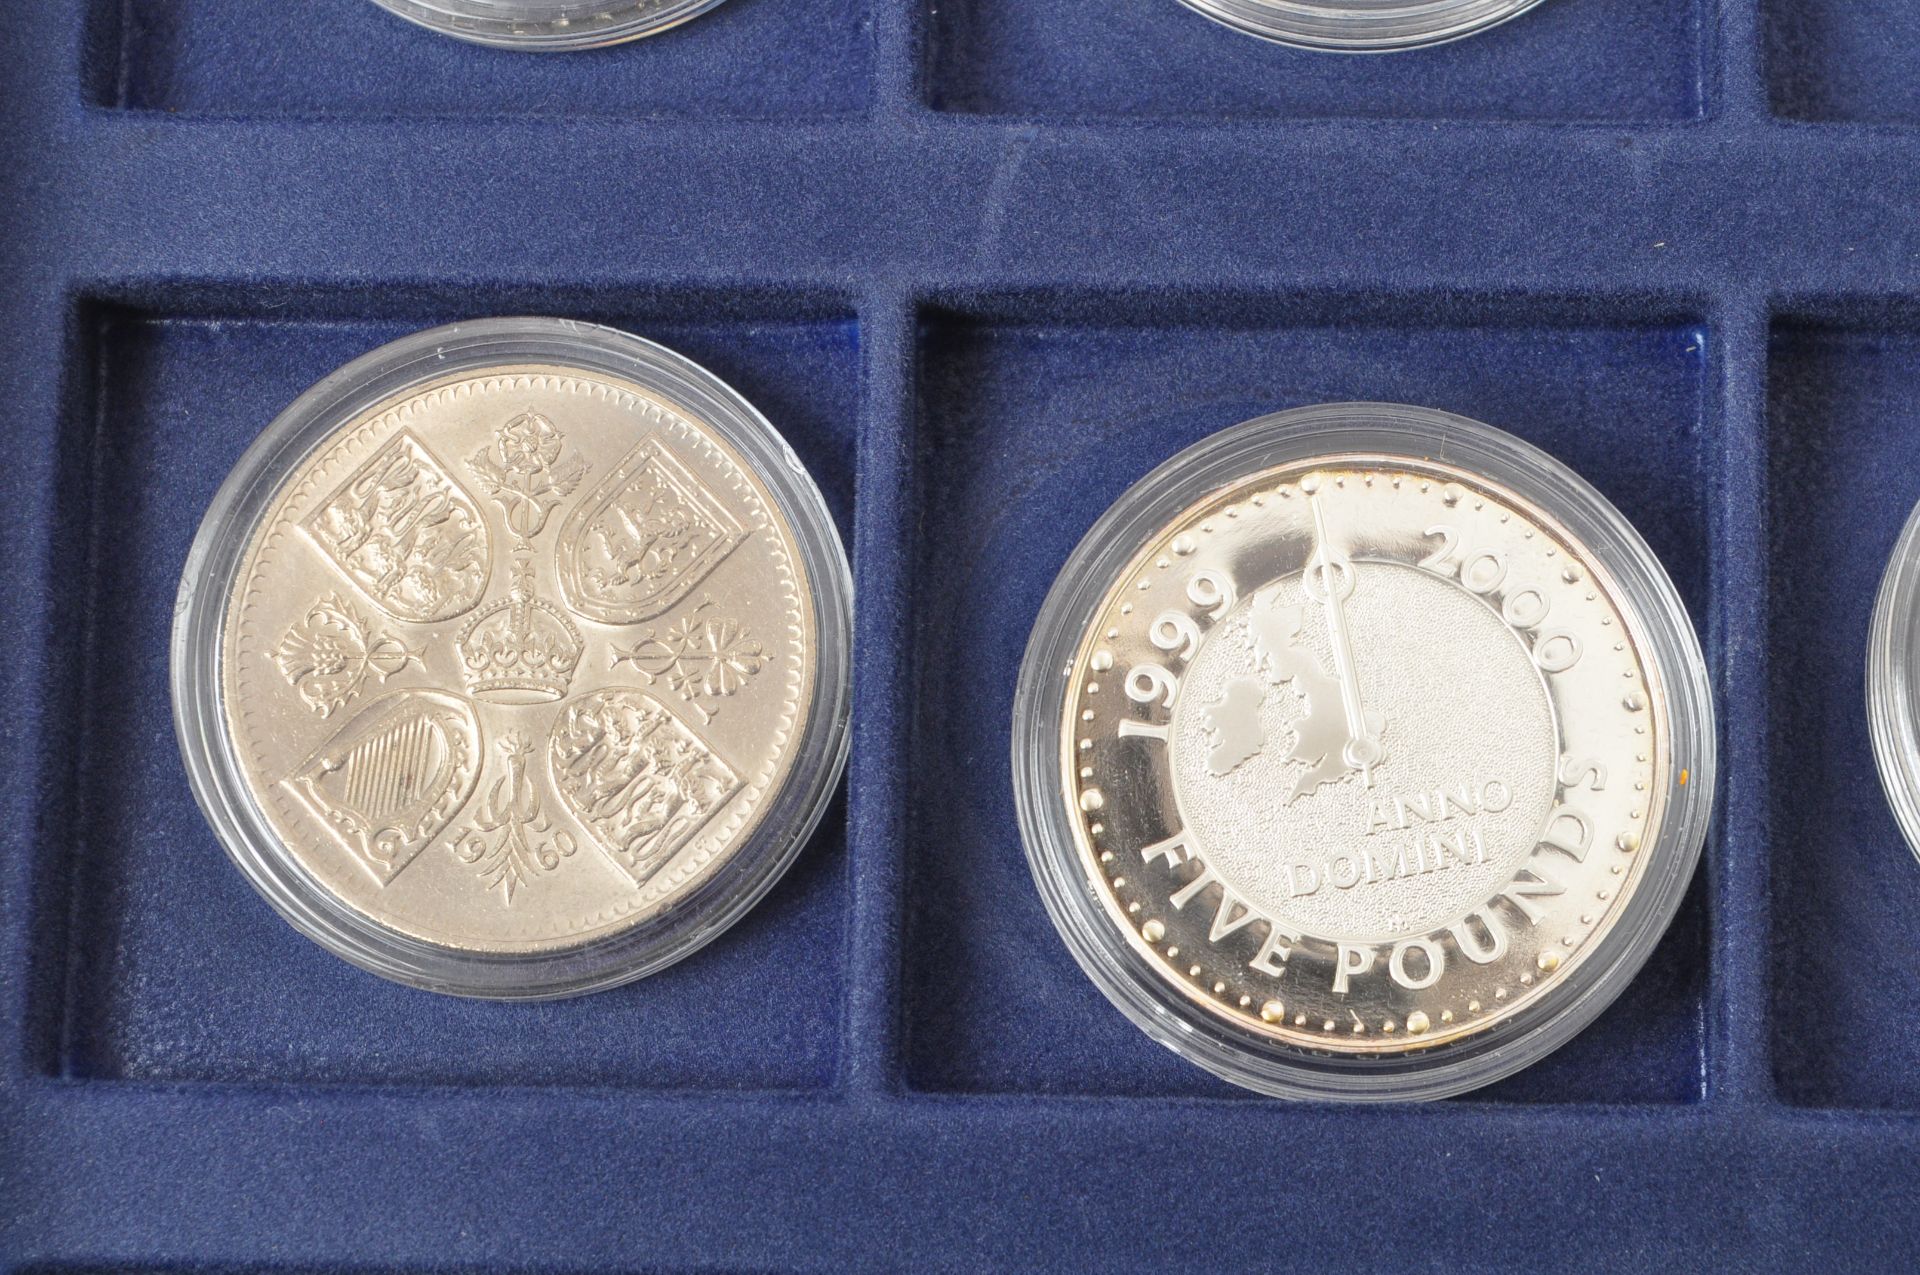 WESTMINSTER MINT - COLLECTION OF SILVER PROOF COINS - Image 5 of 8